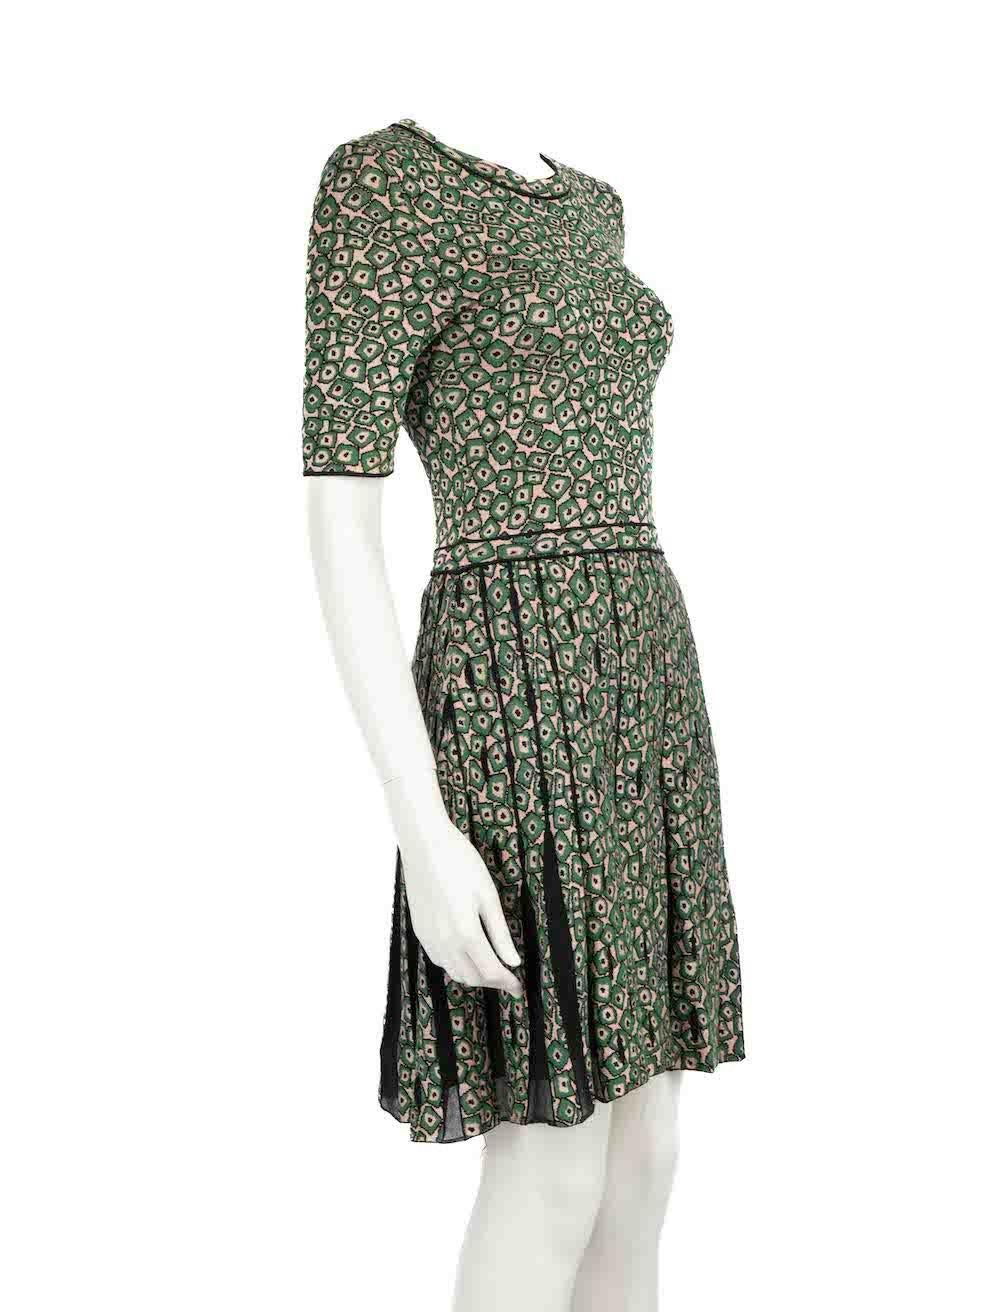 CONDITION is Very good. Hardly any visible wear to dress is evident on this used M Missoni designer resale item.
 
 
 
 Details
 
 
 Green
 
 Synthetic
 
 Knee length dress
 
 Abstract jacquard pattern
 
 Knitted and stretchy
 
 Round neckline
 
